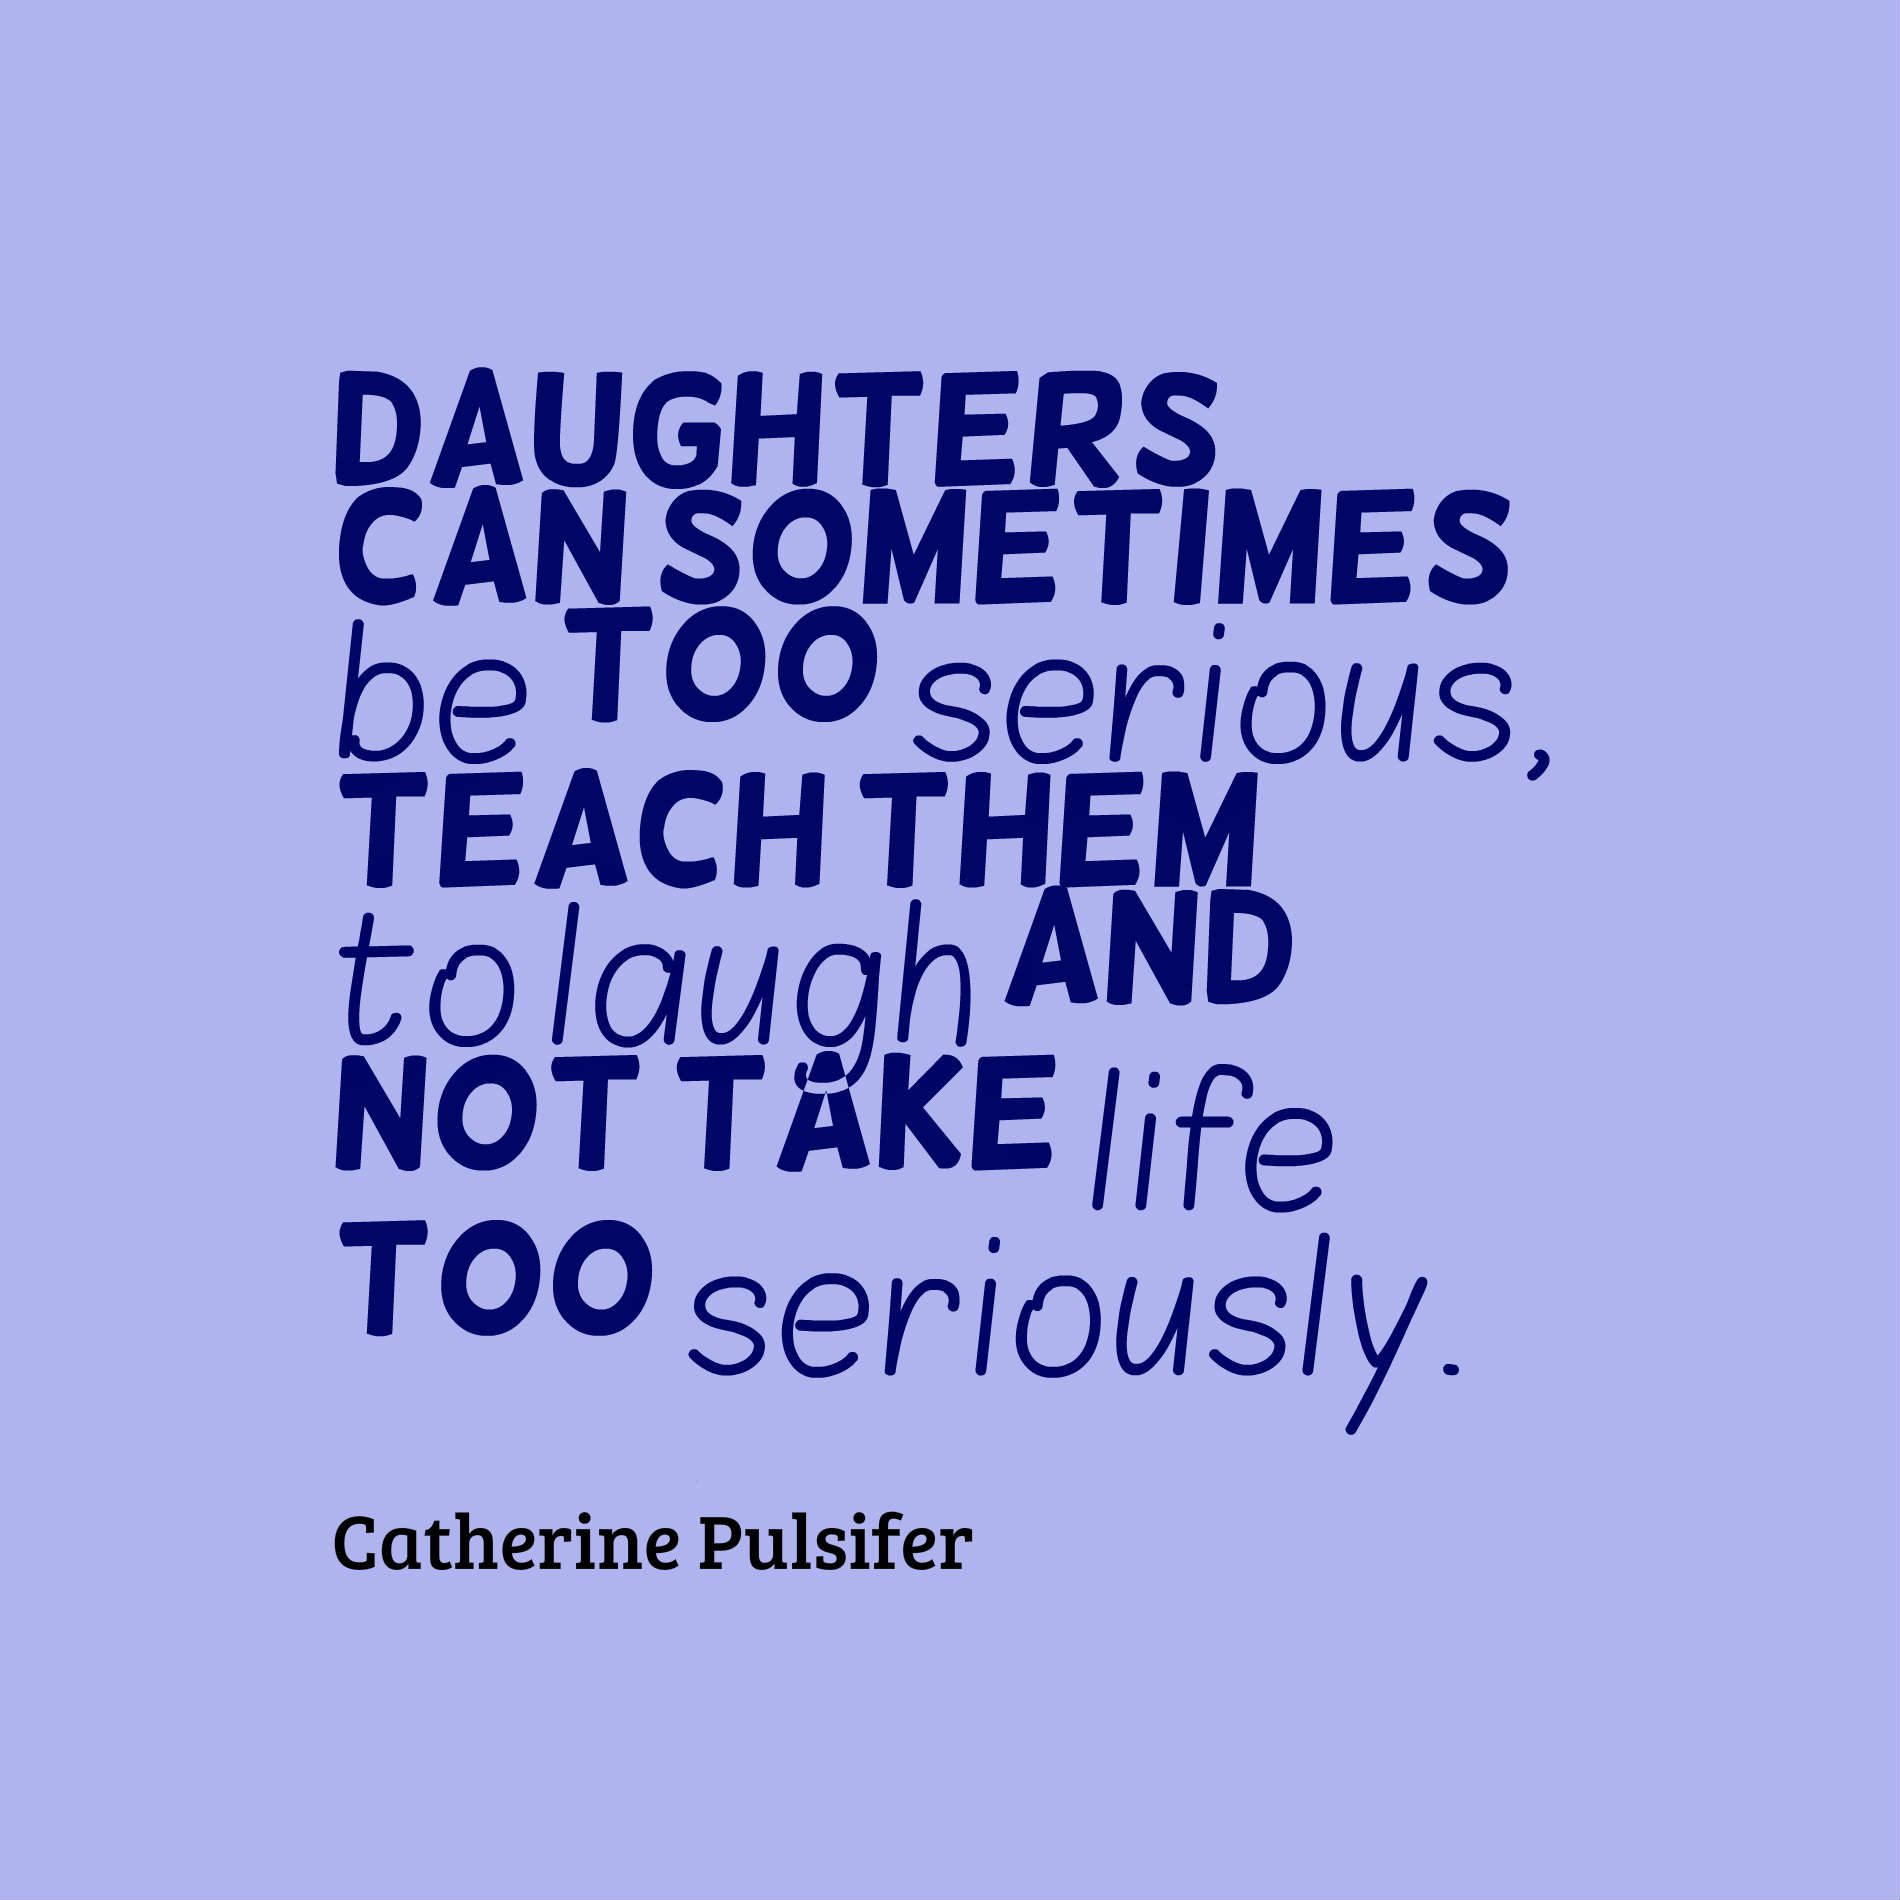 Daughters can sometimes be too serious, teach them to laugh and not take life too seriously.